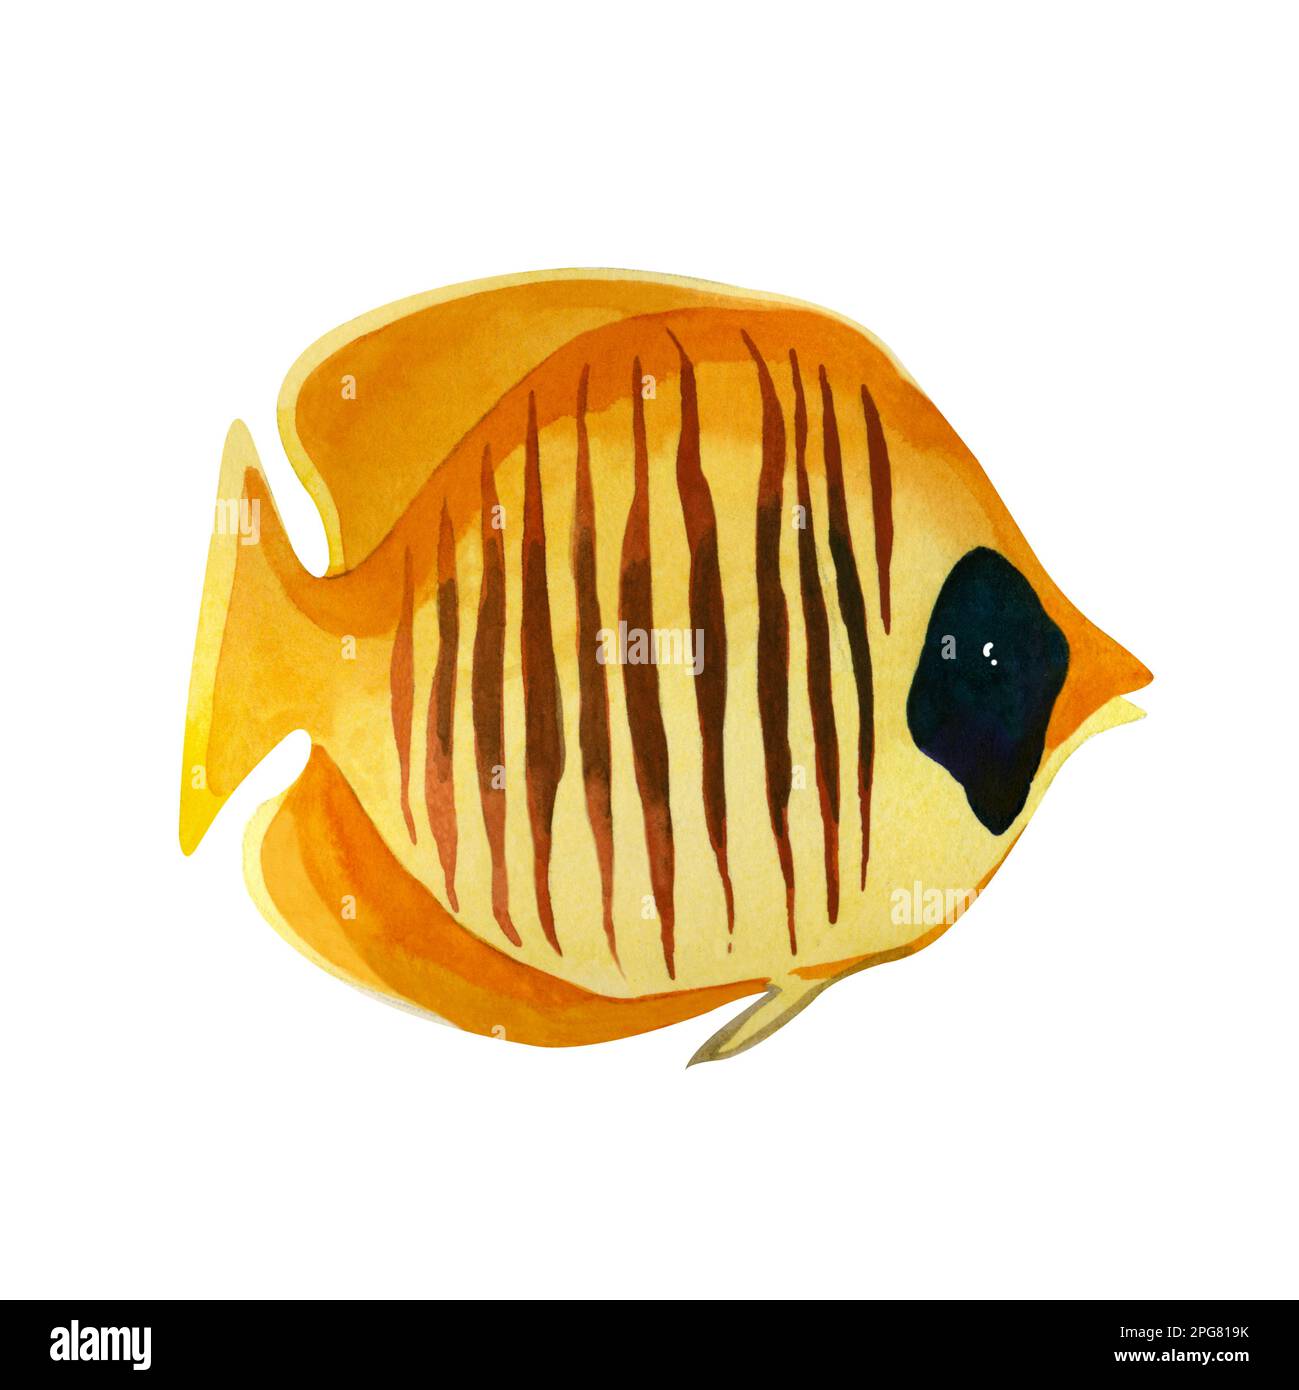 Tropical fish. Watercolor illustration of a bright yellow coral fish with brown stripes and a dark spot on its head, hand-drawn in watercolor on a whi Stock Photo